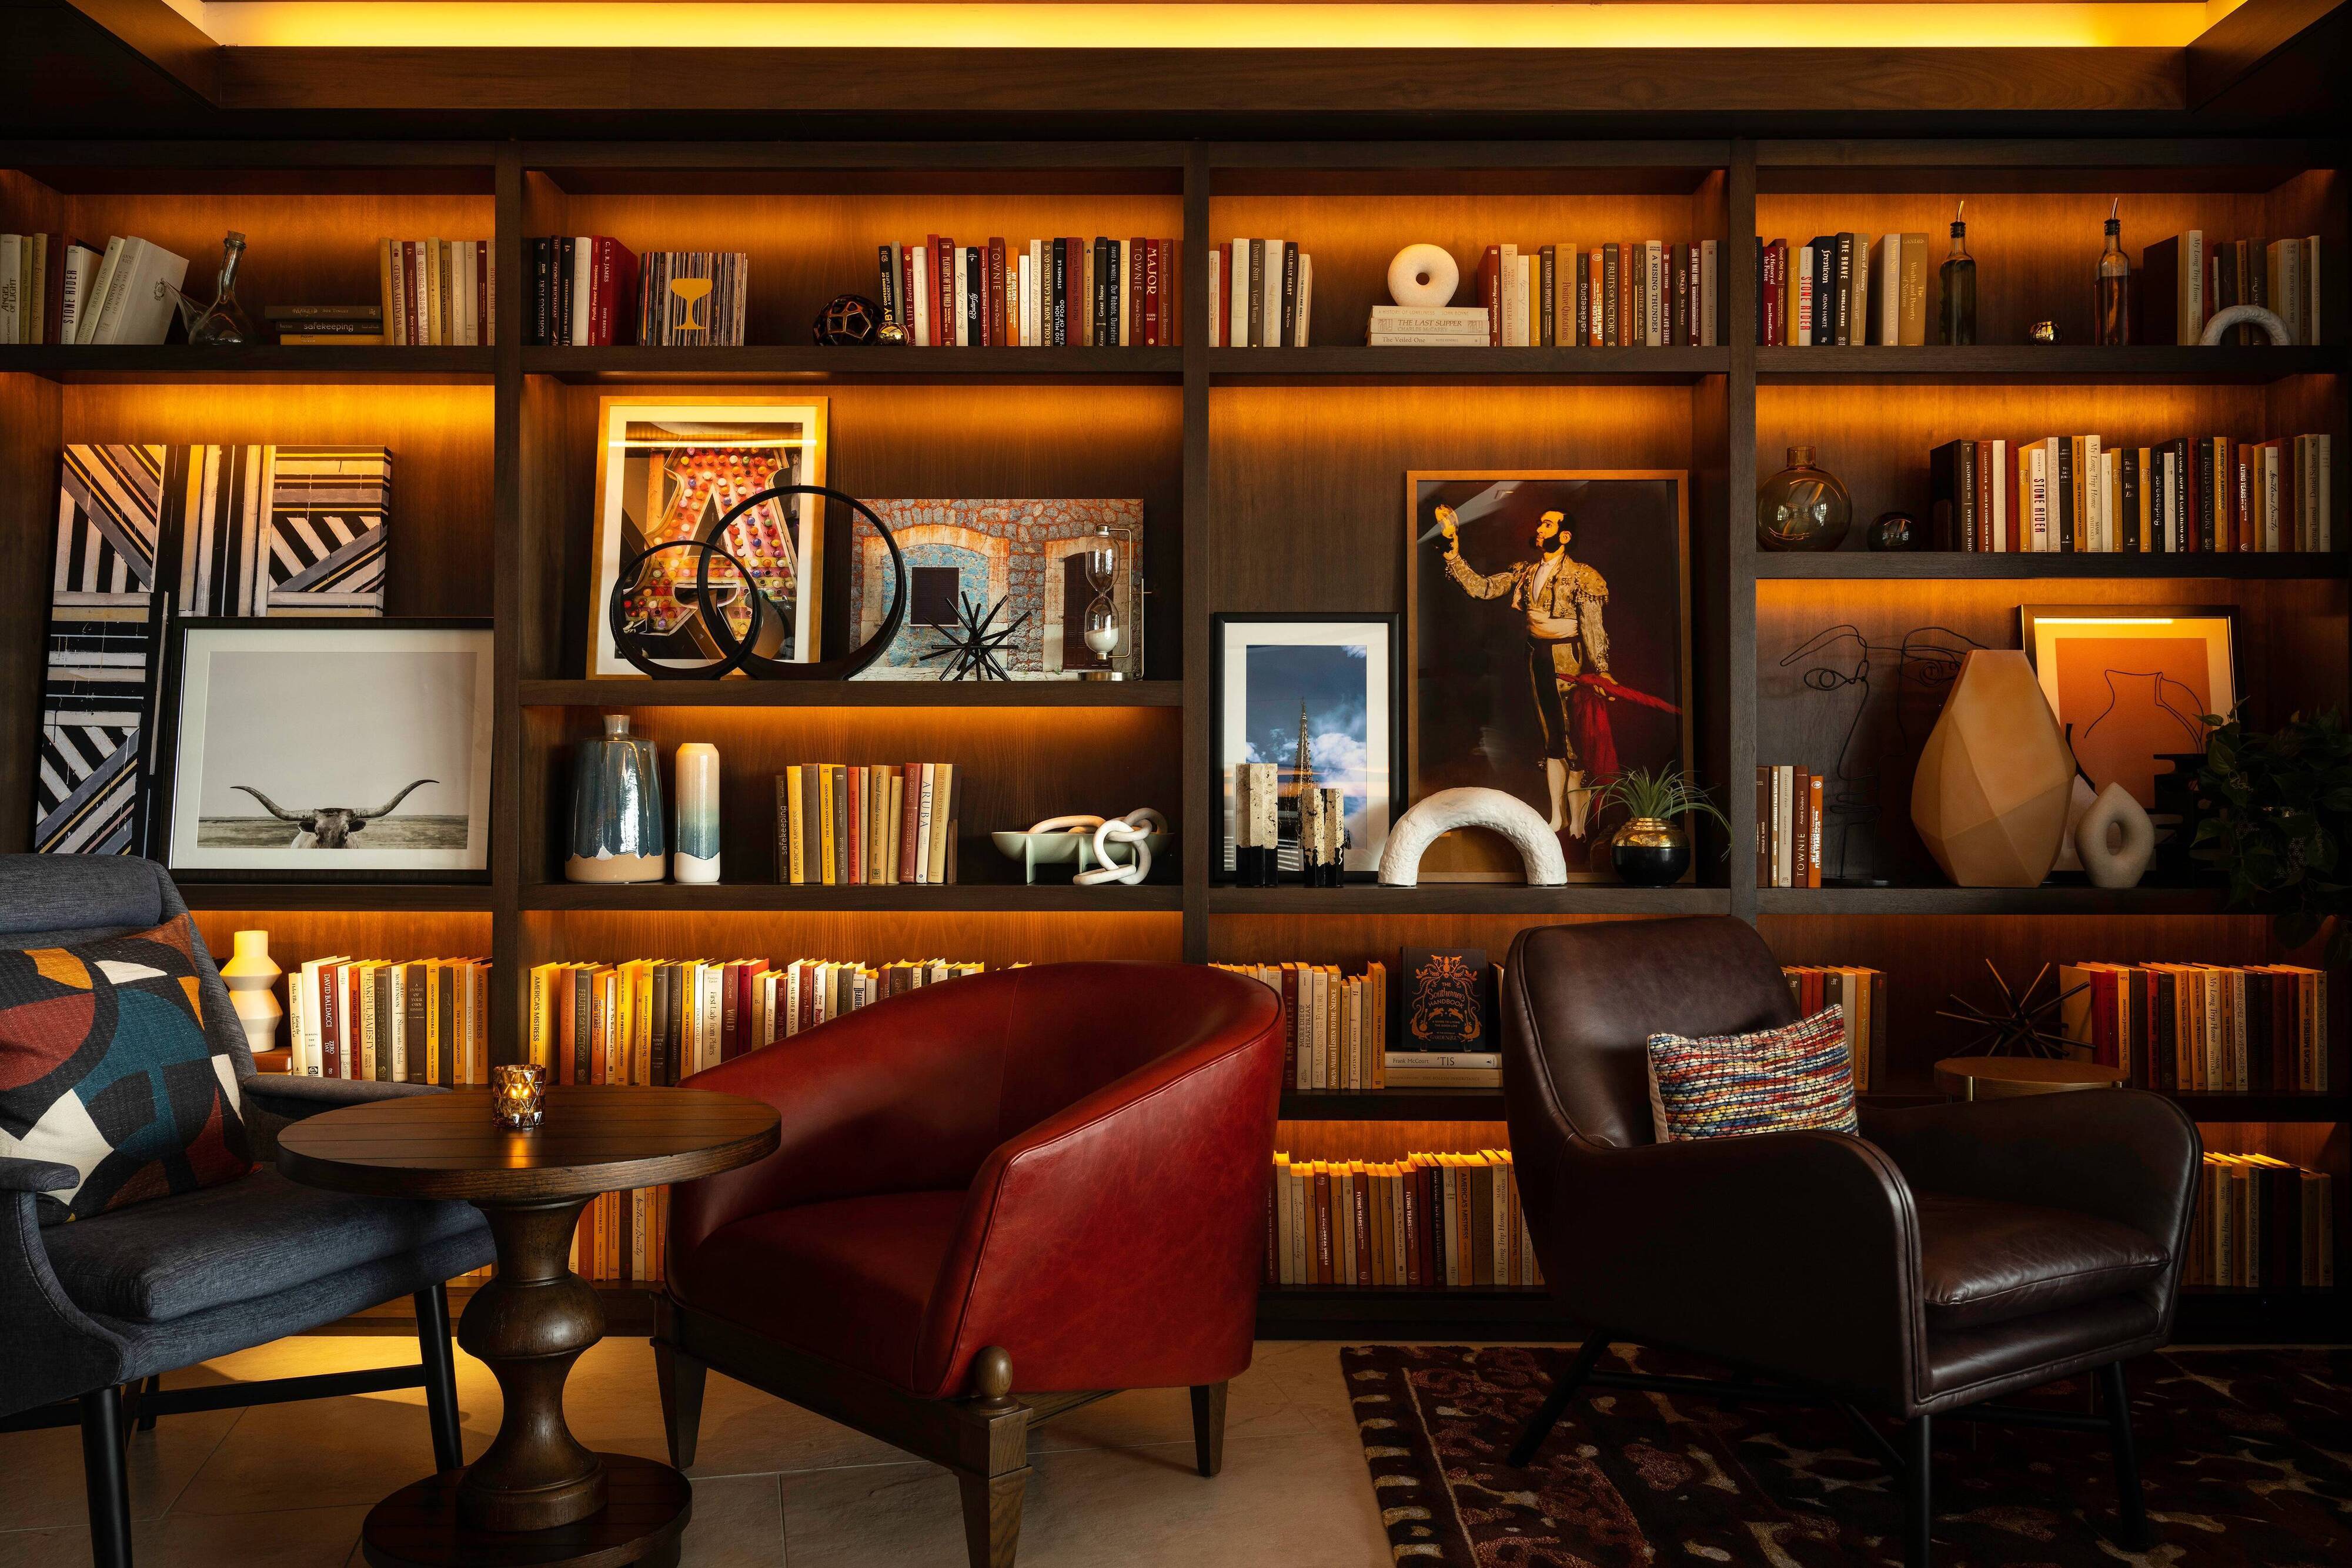 Hotel library